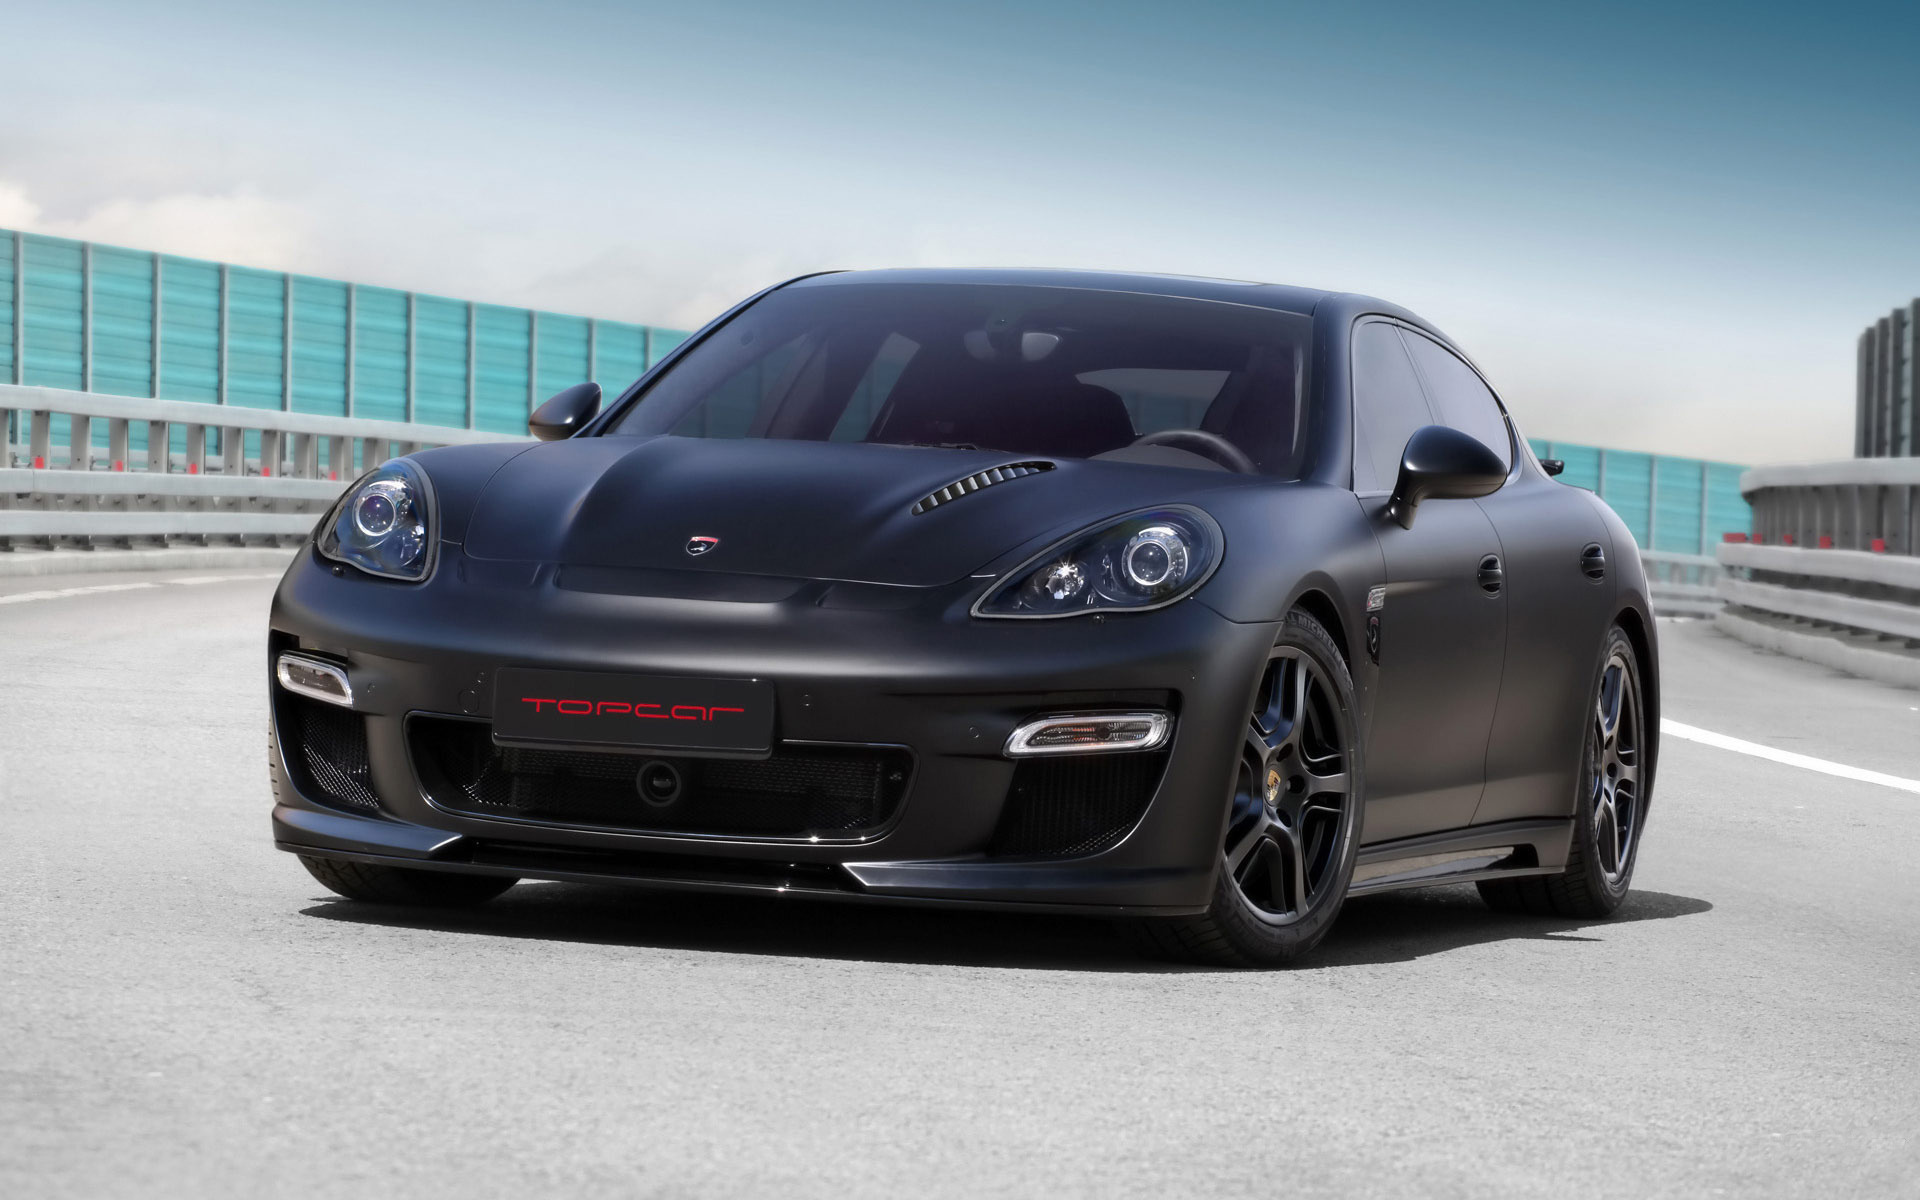 File Name High resolution wallpaper of Porsche panamera picture of